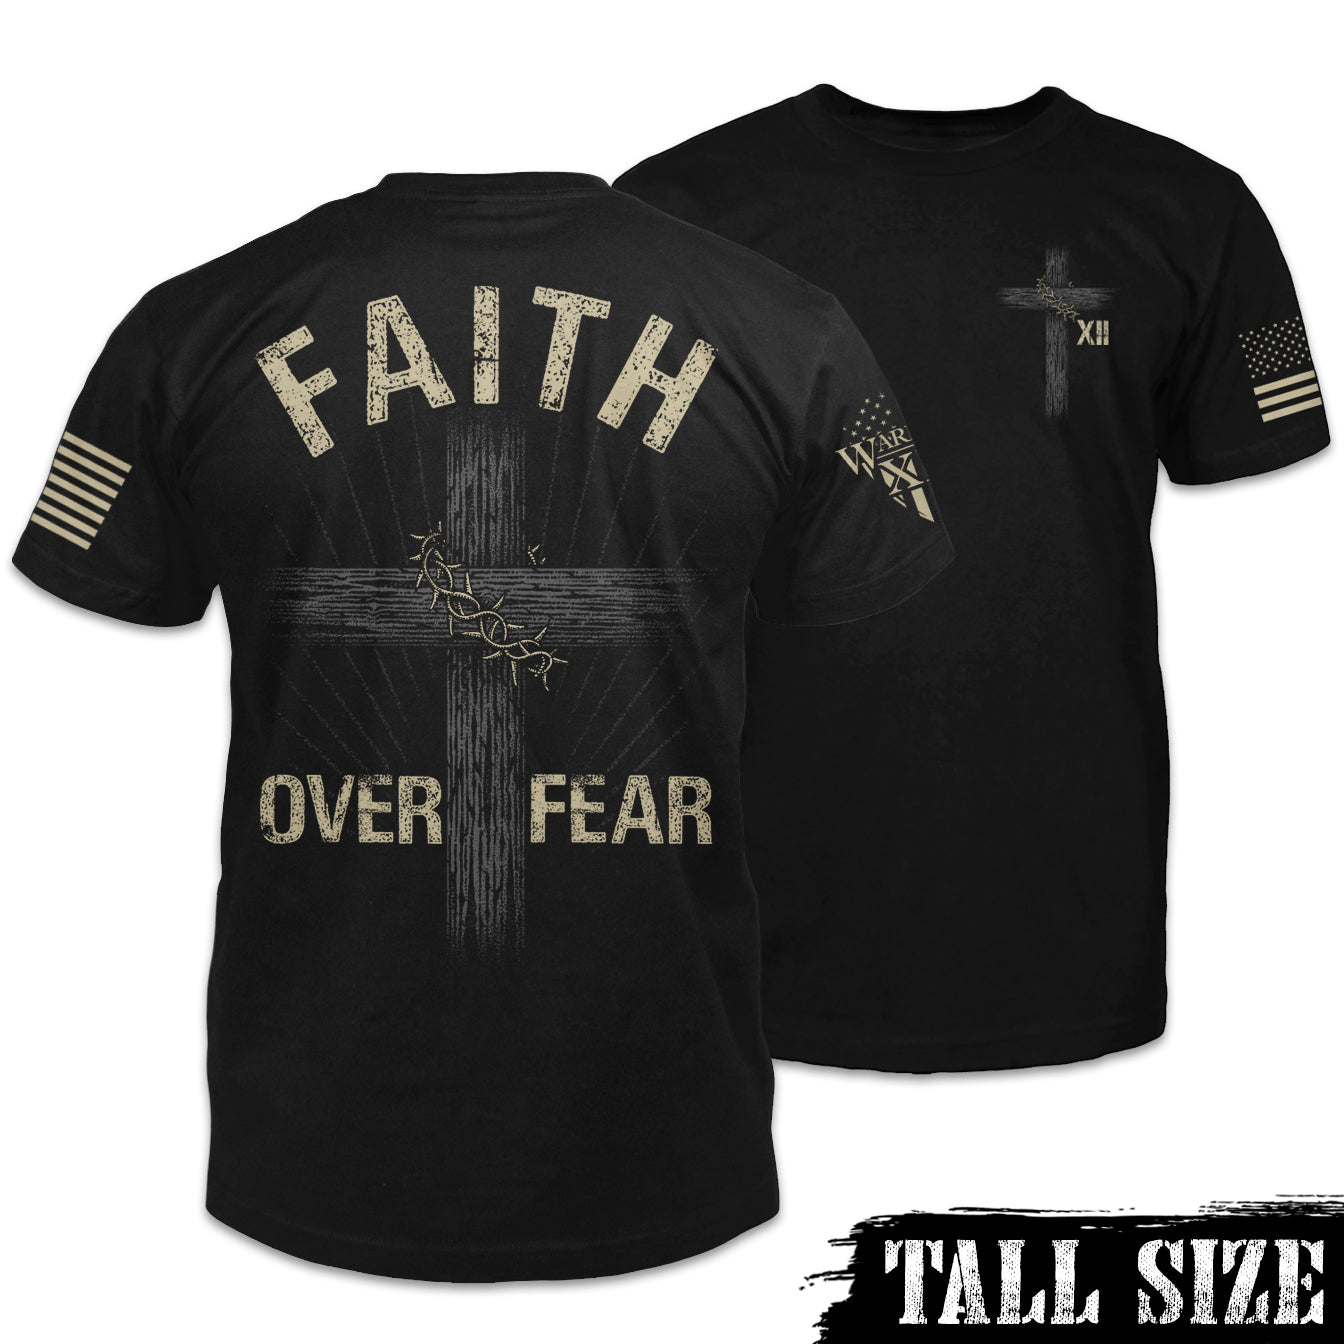 Front & back black tall size shirt with the words "Faith Over Fear" with a cross printed on the shirt.